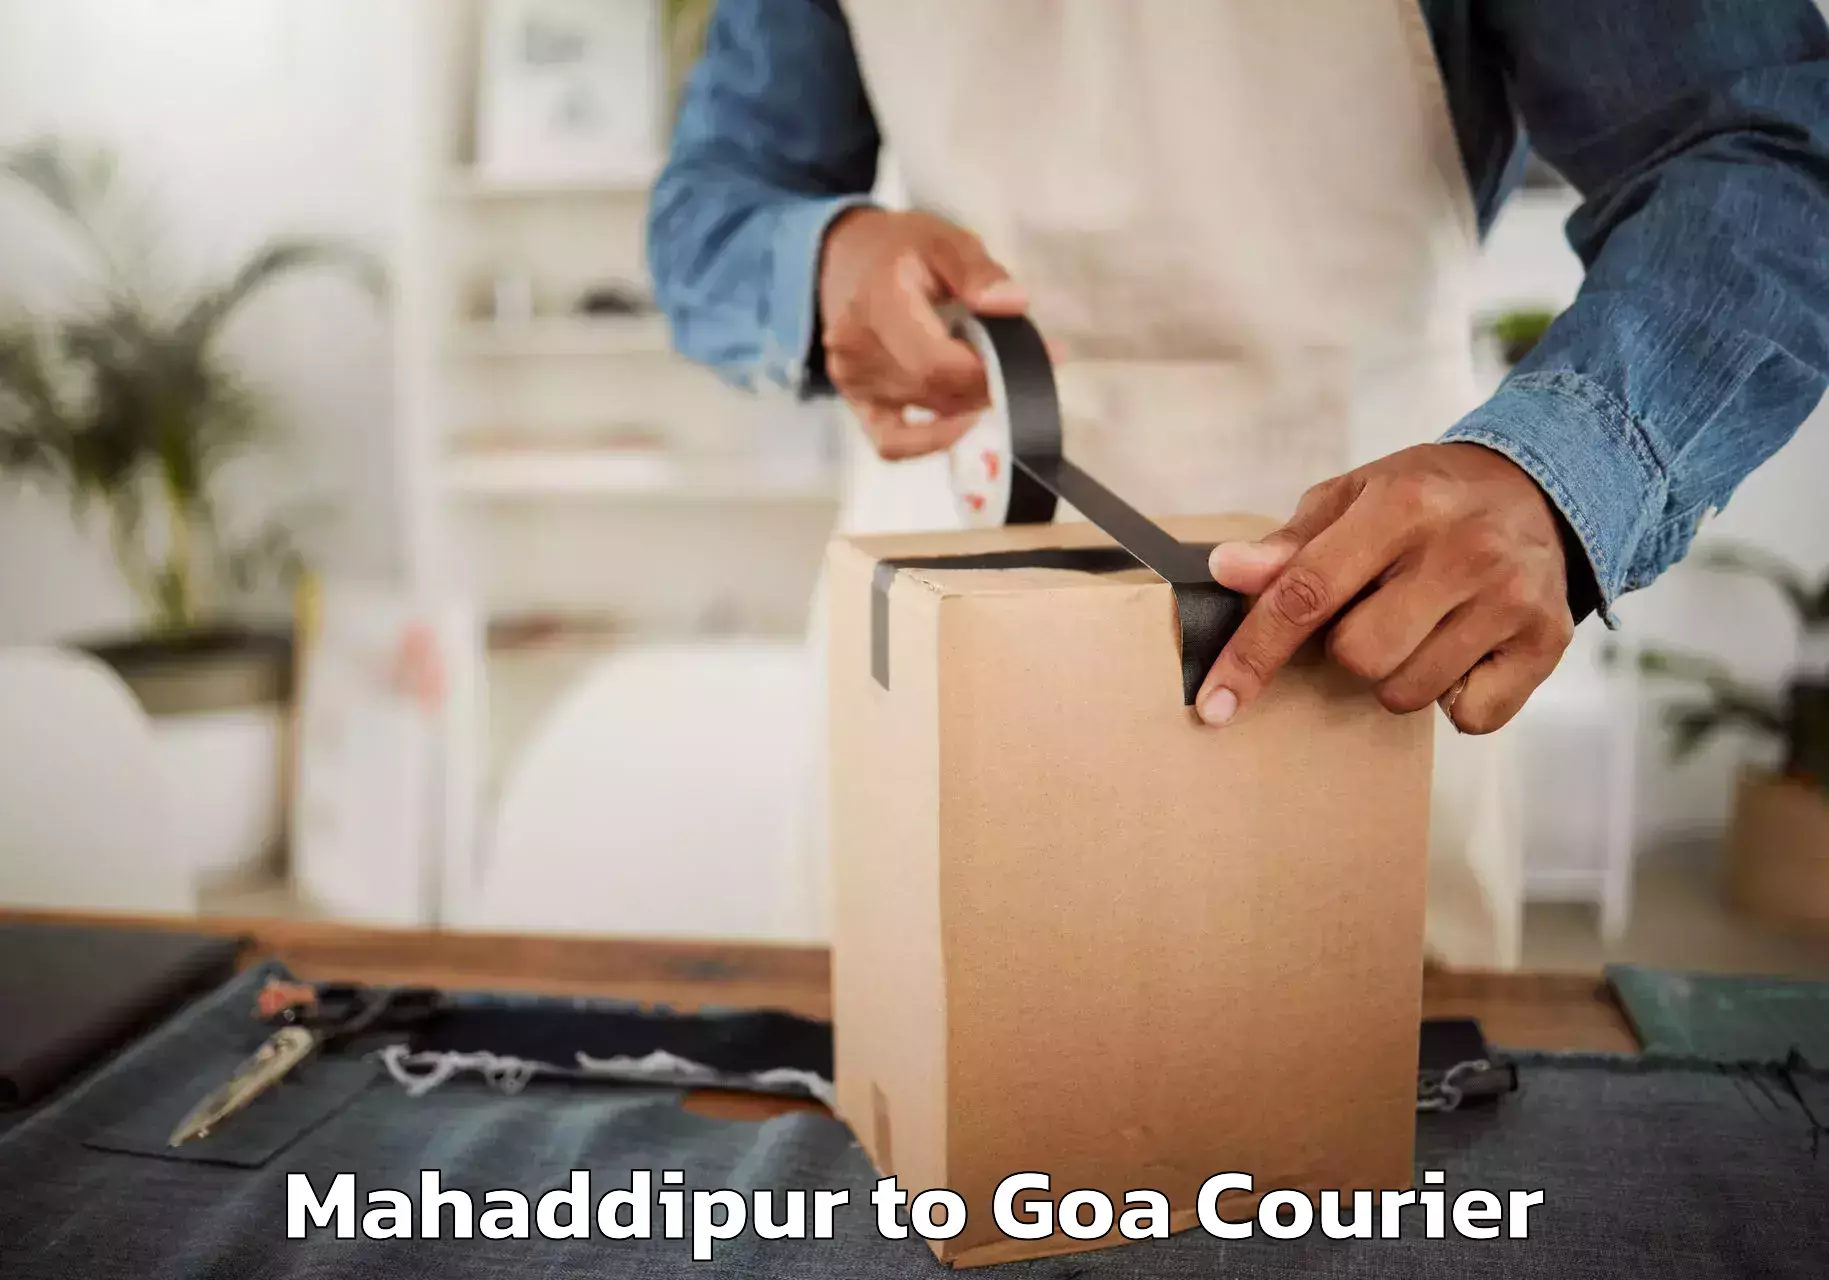 Hassle-free relocation in Mahaddipur to Bardez